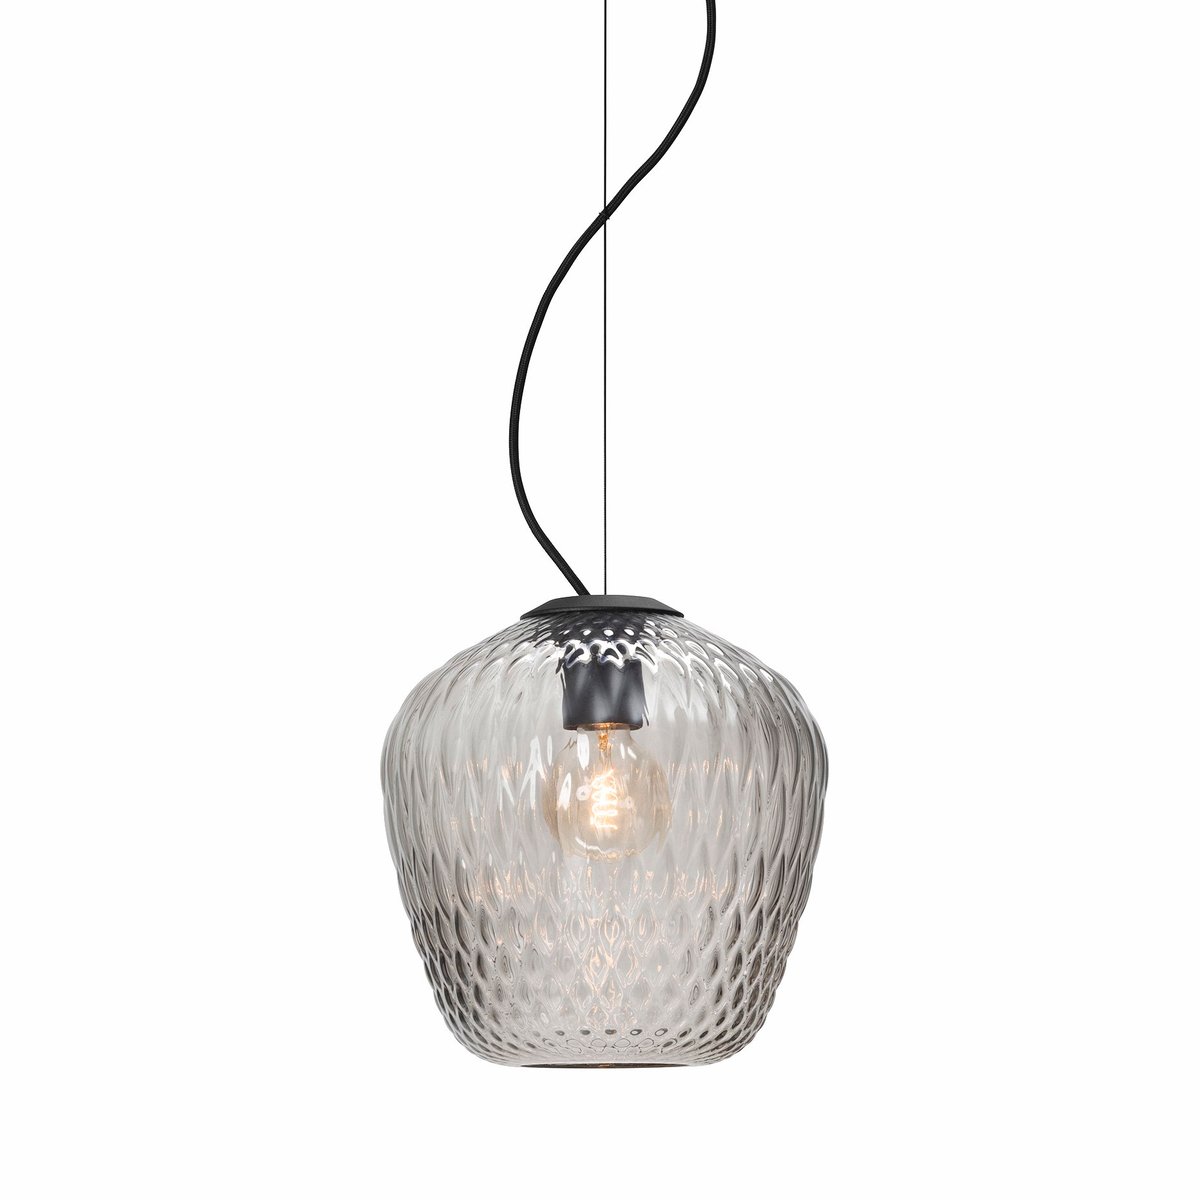 &Tradition Blown hanglamp zilver